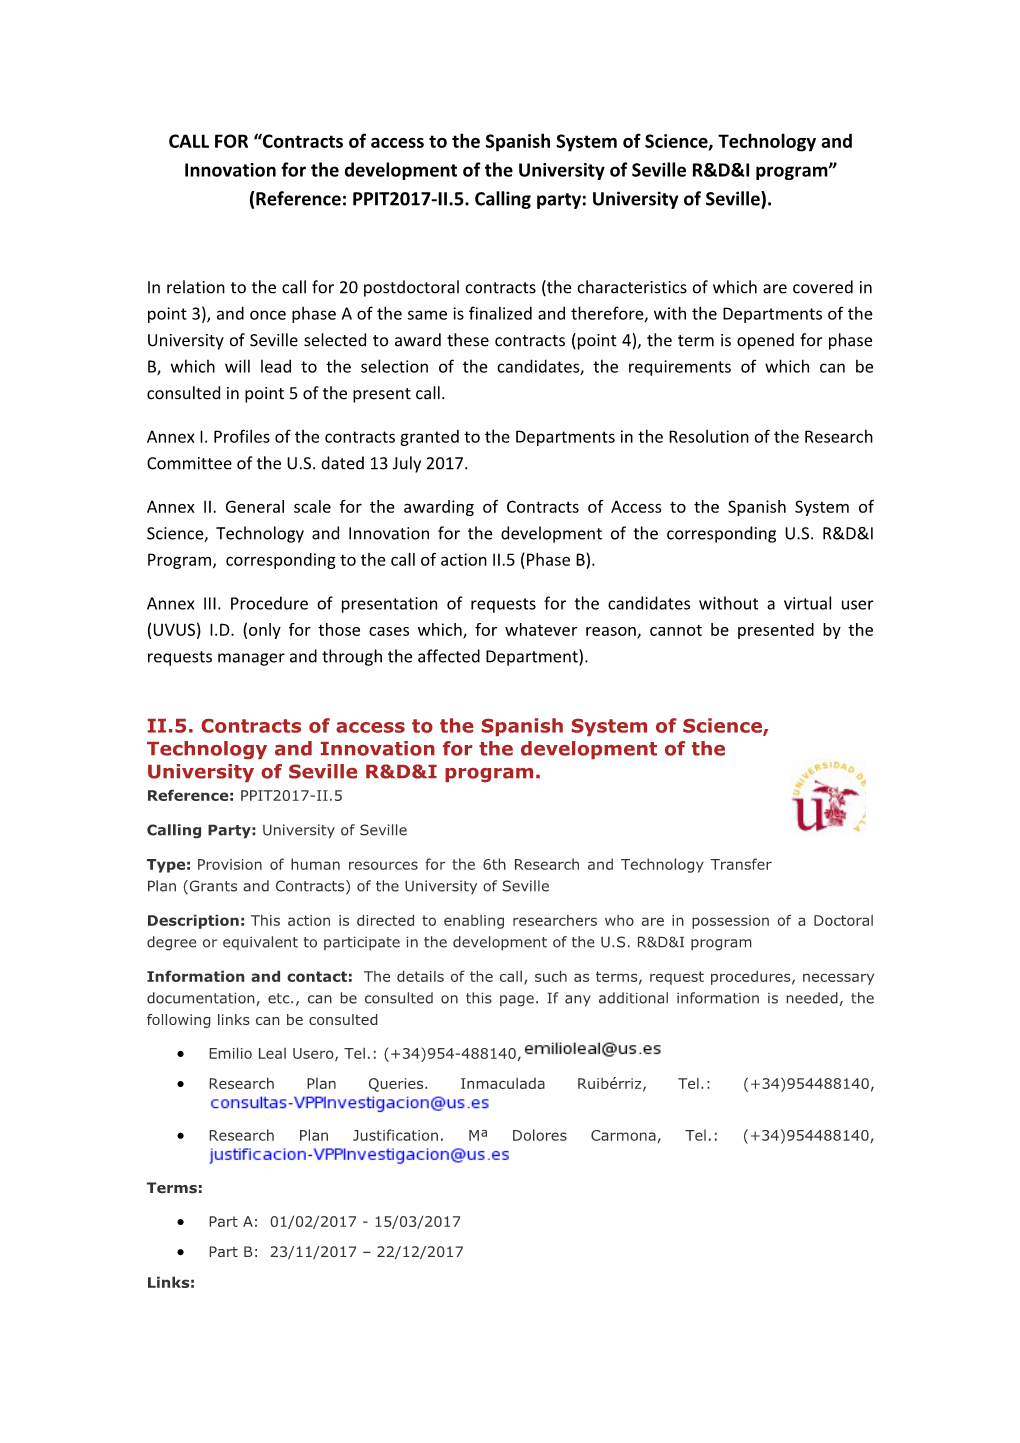 CALL for Contracts of Access to the Spanish System of Science, Technology and Innovation